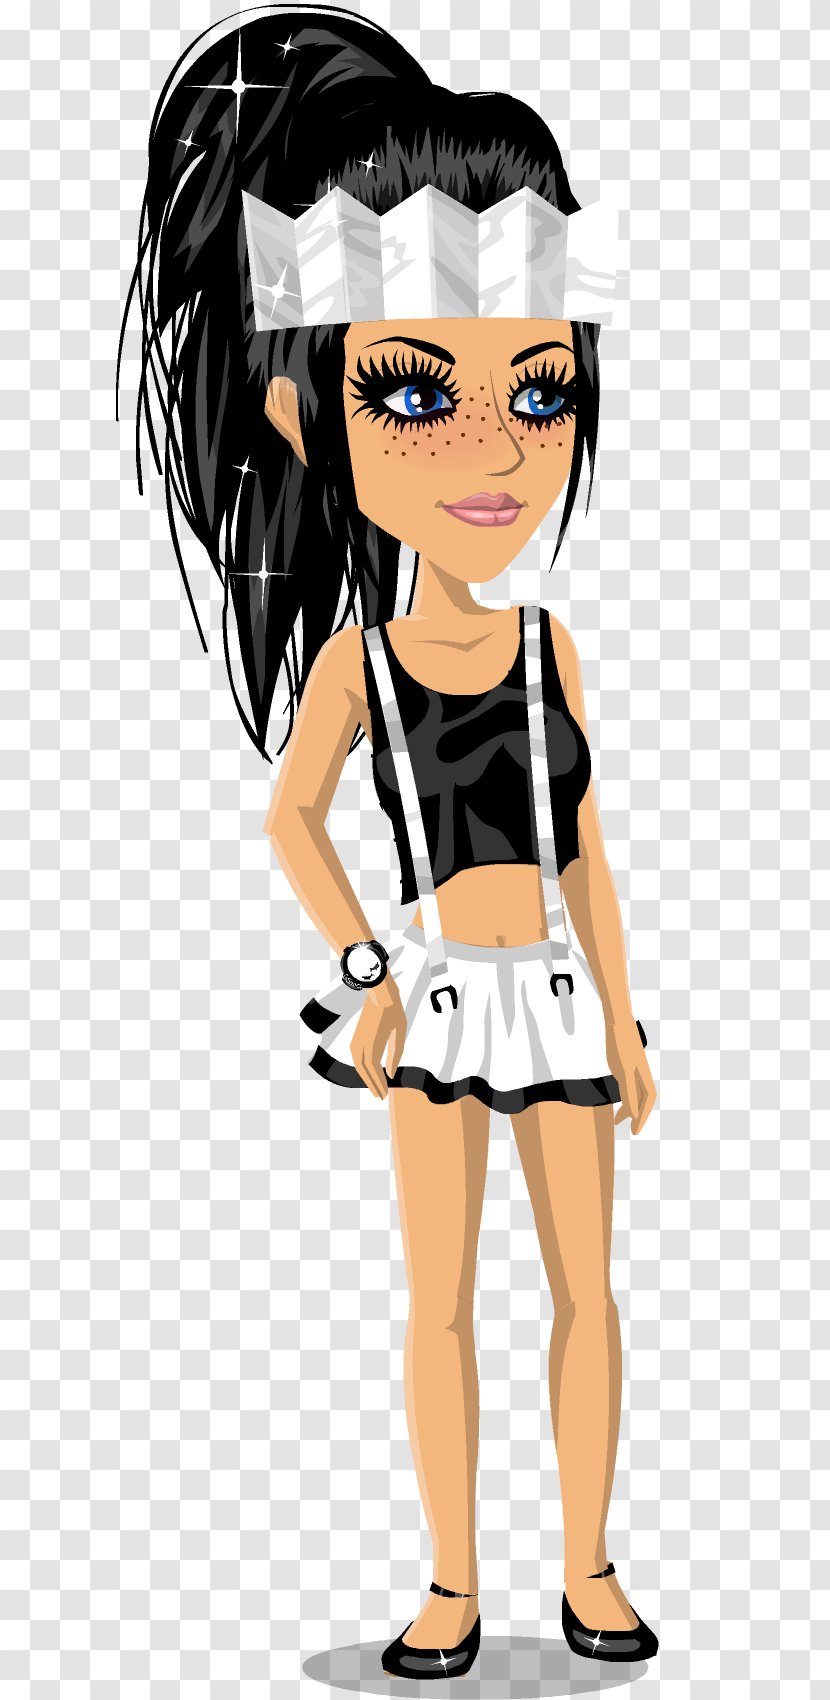 MovieStarPlanet Person Character The Chain - Cartoon - Silhouette Transparent PNG